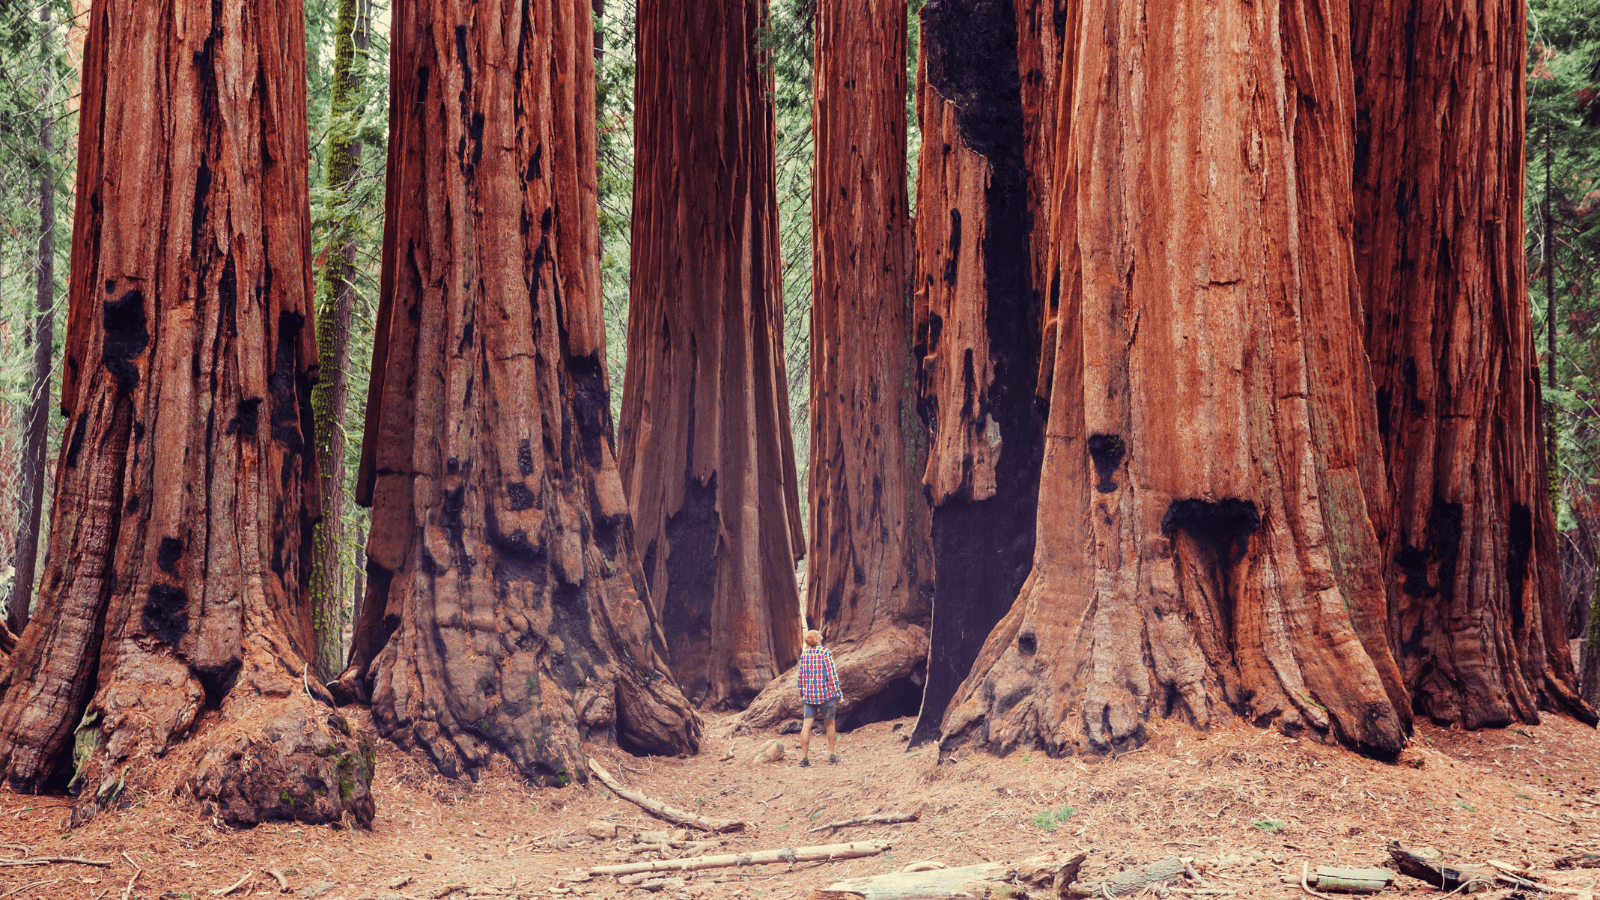 Person standing under Giant Sequoia trees